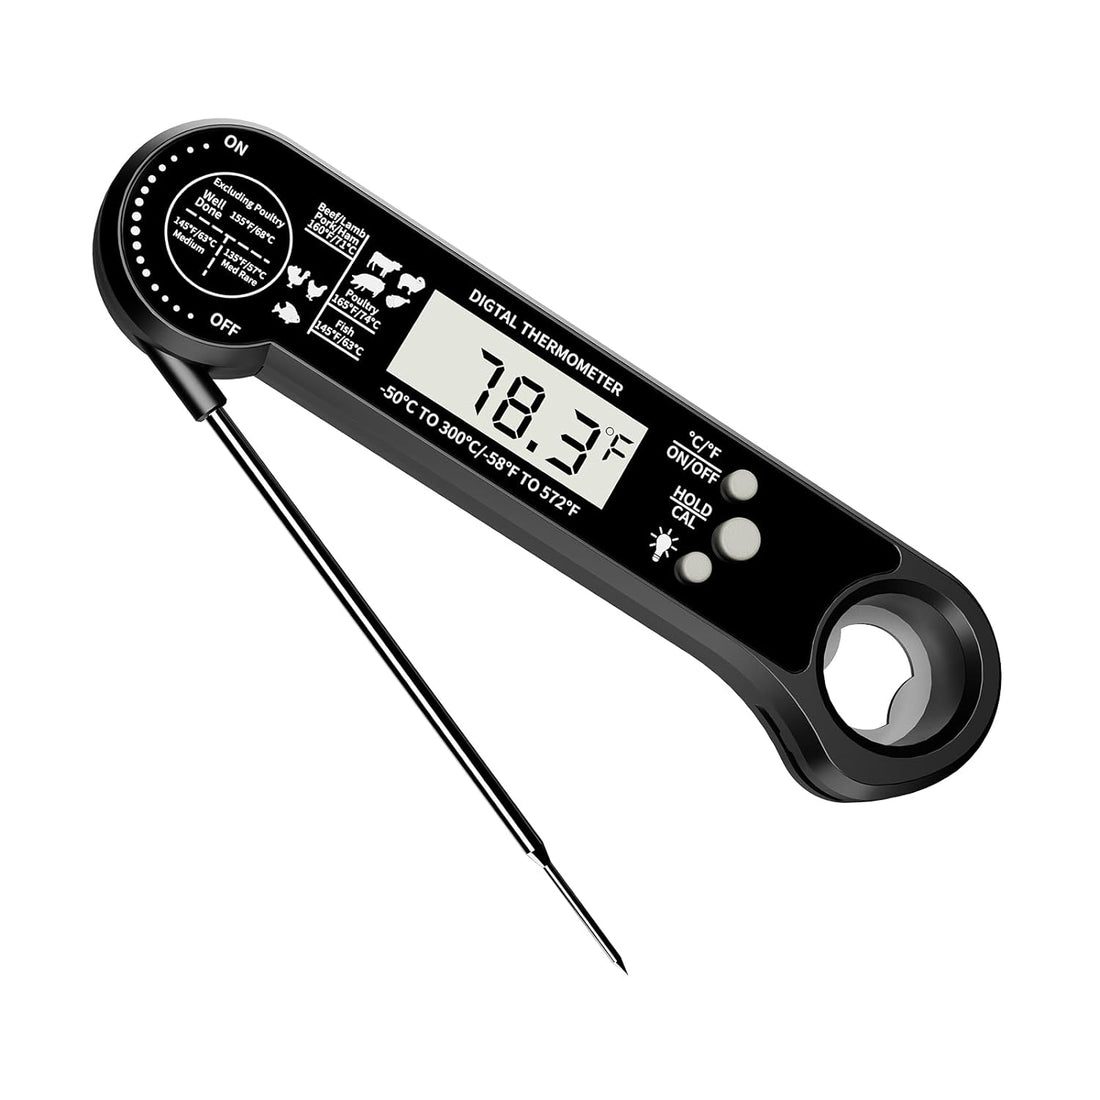 Instant Read Meat Thermometer Digital,judogolf ipx6 Candy Thermometer Food Thermometer Cooking Thermometer with Backlight, Calibration, and Foldable Probe for Grilling(Black)